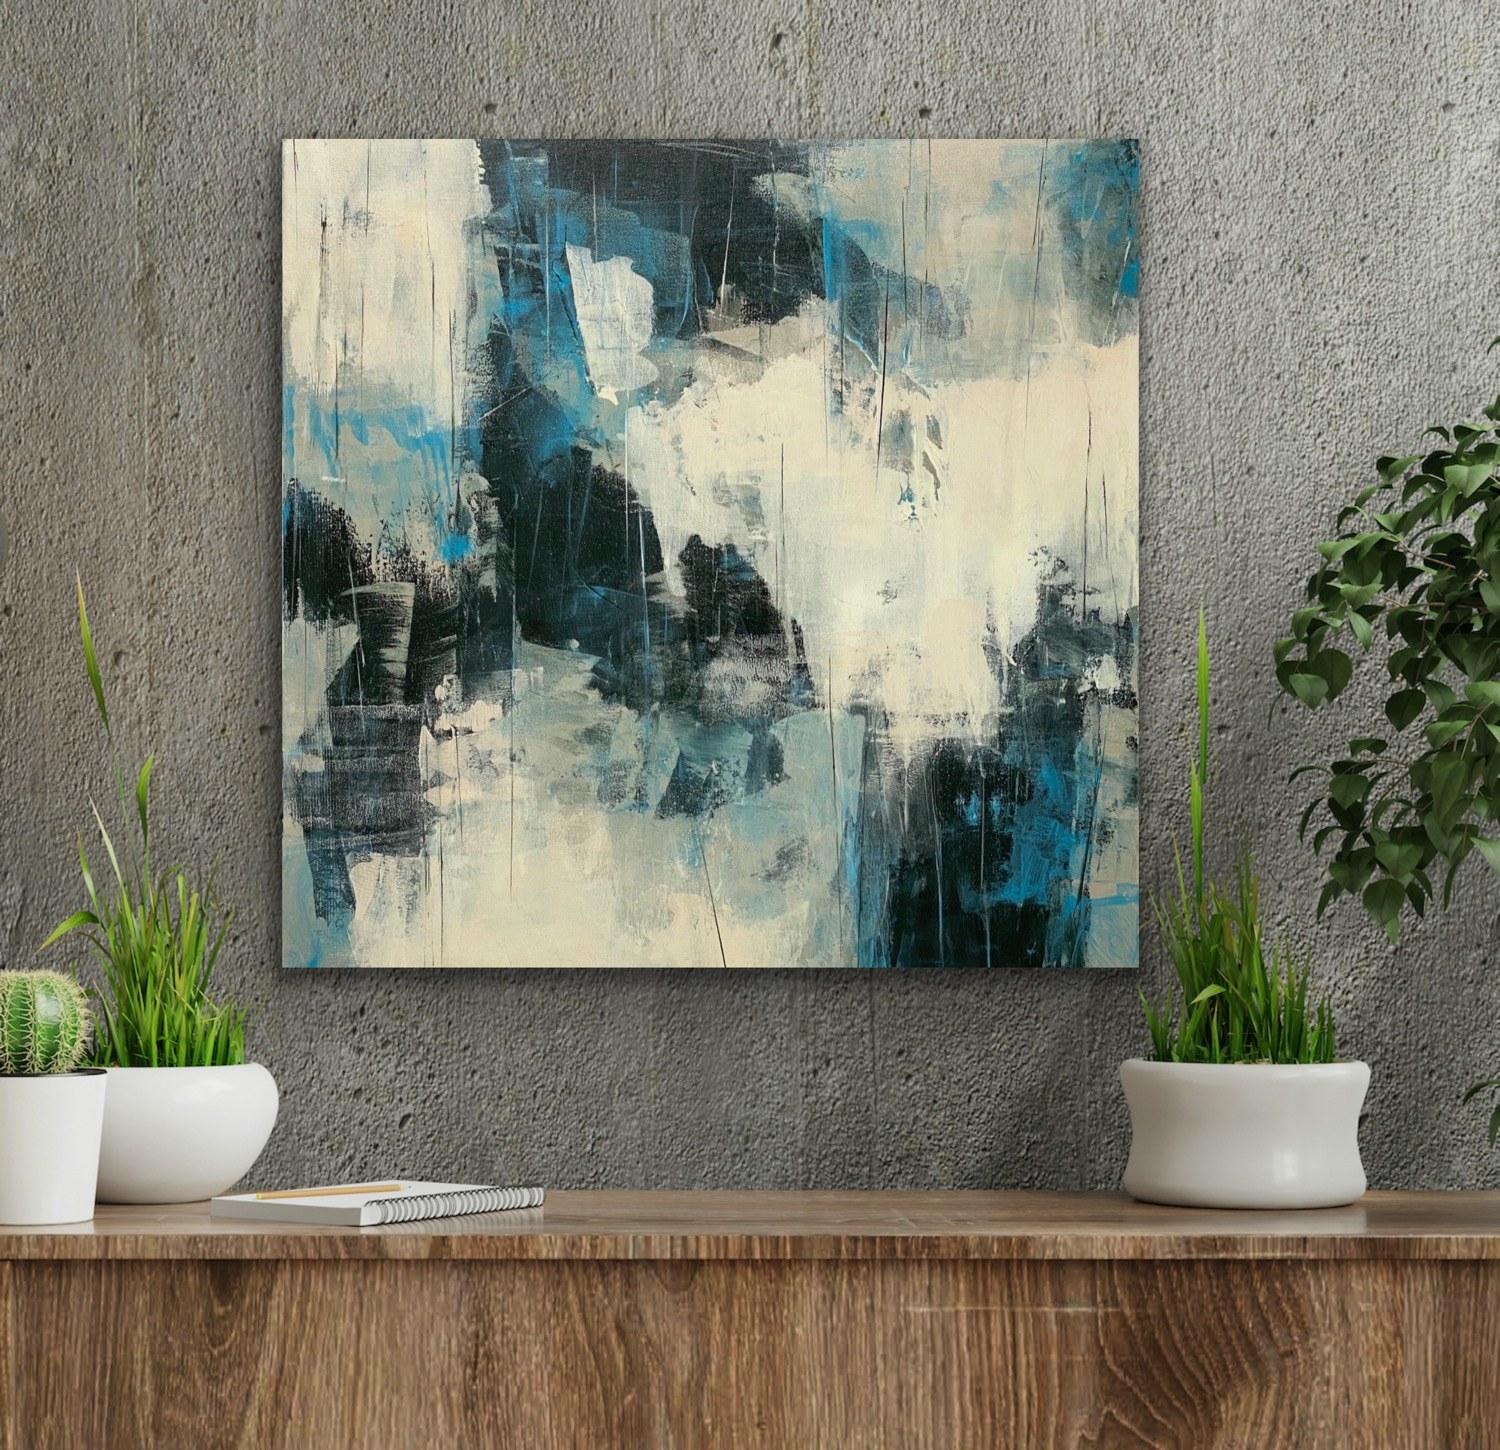 Cutting Edge, blue, black, white, gray, abstract expressionism - Abstract Impressionist Painting by Juanita Bellavance 